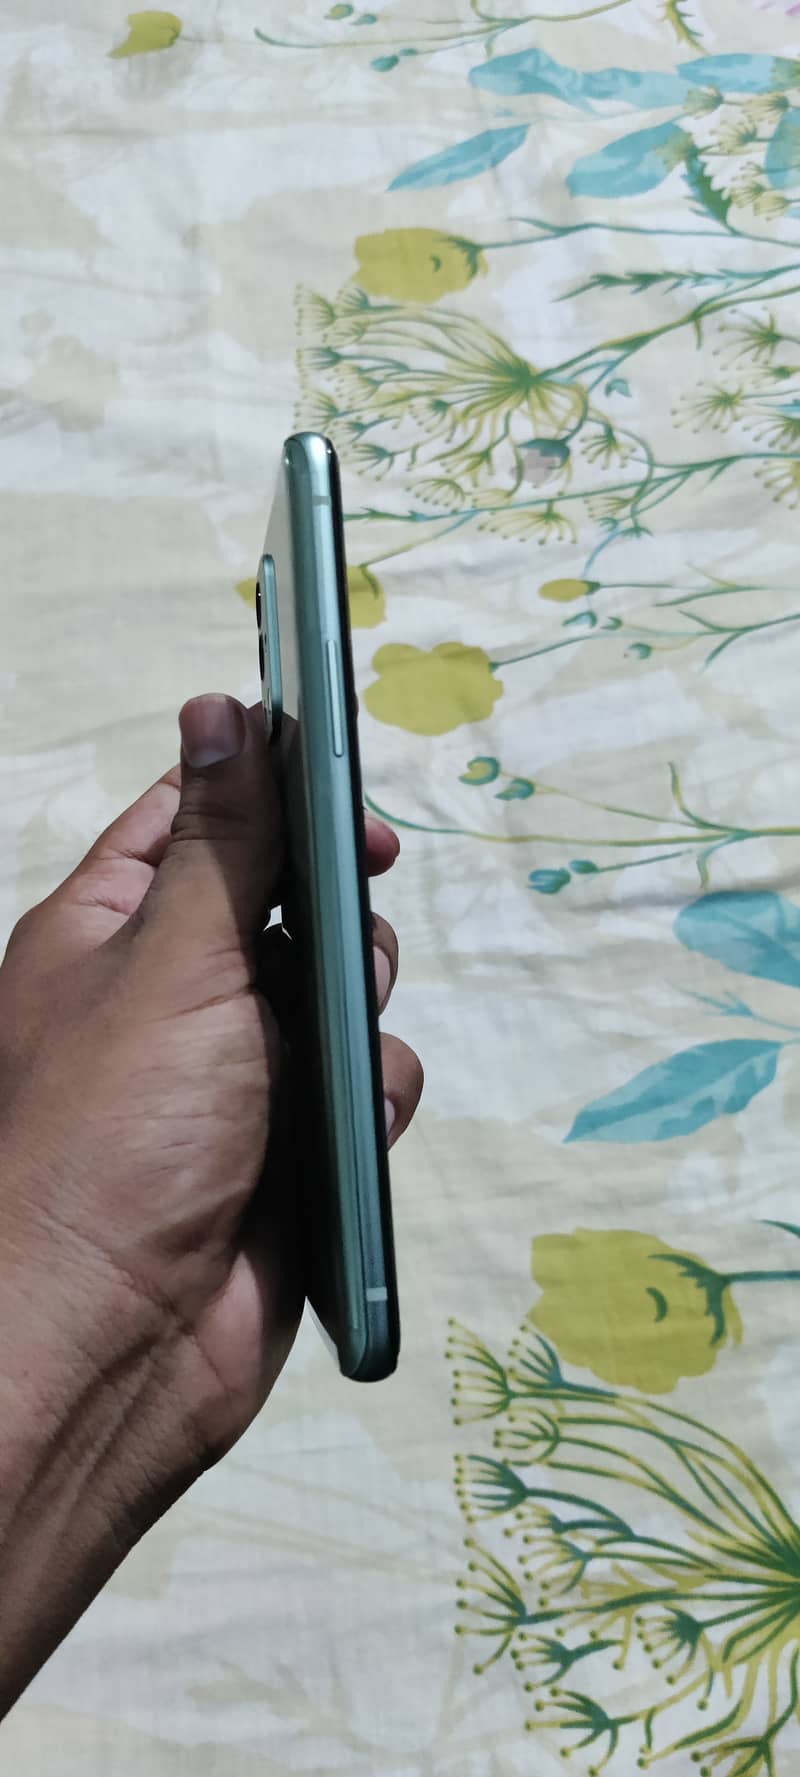 One plus 9R 10/10 condition 5